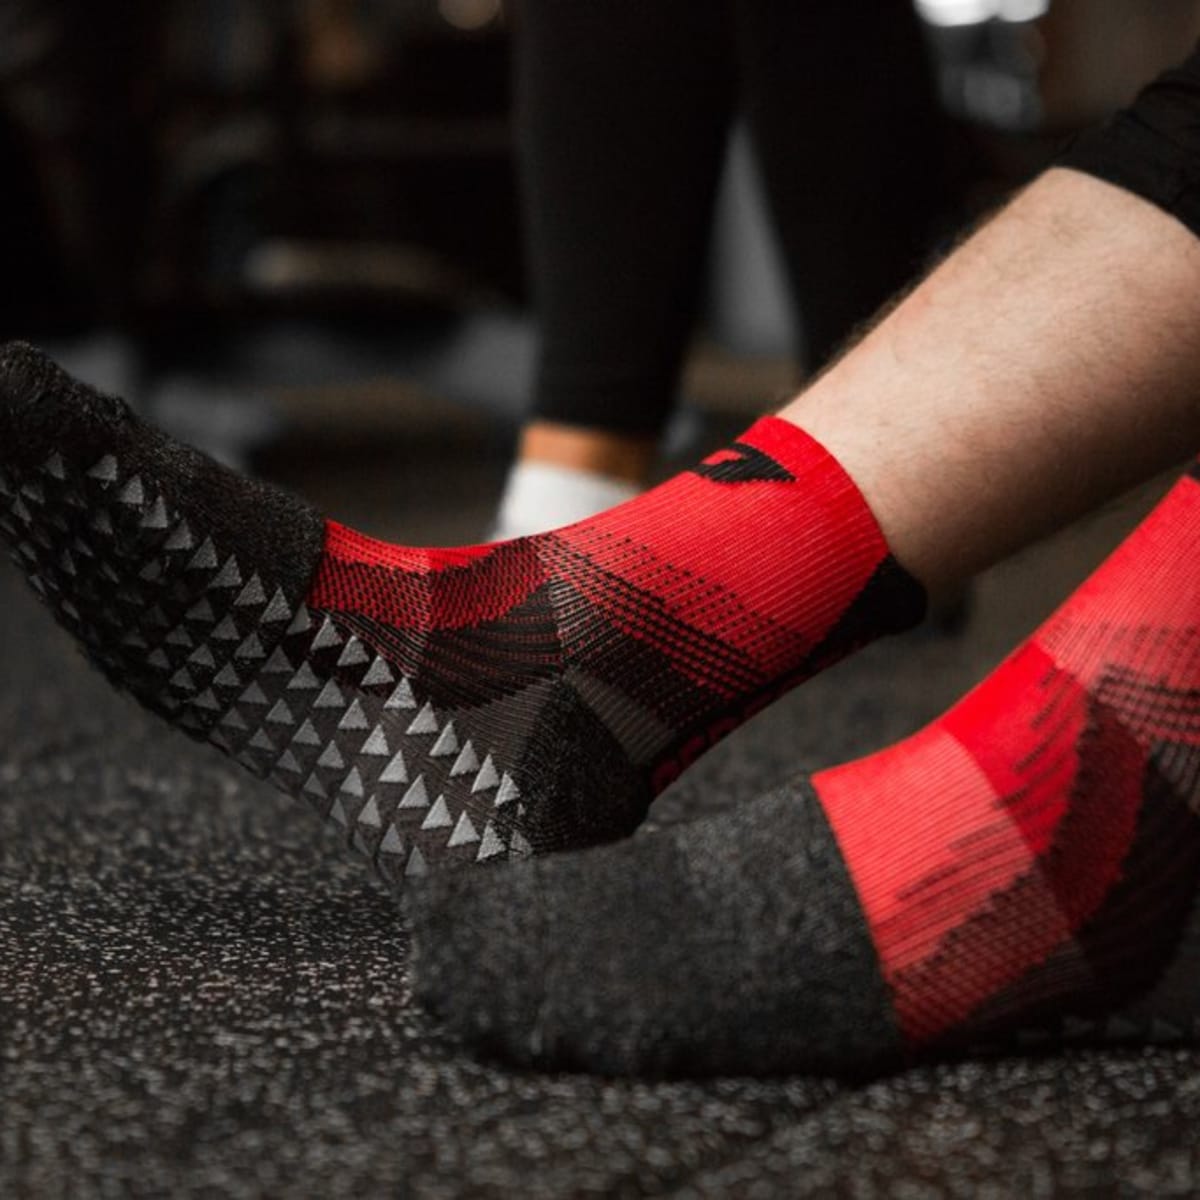 My Favorite New Gym Shoes Are These Socks - Men's Journal